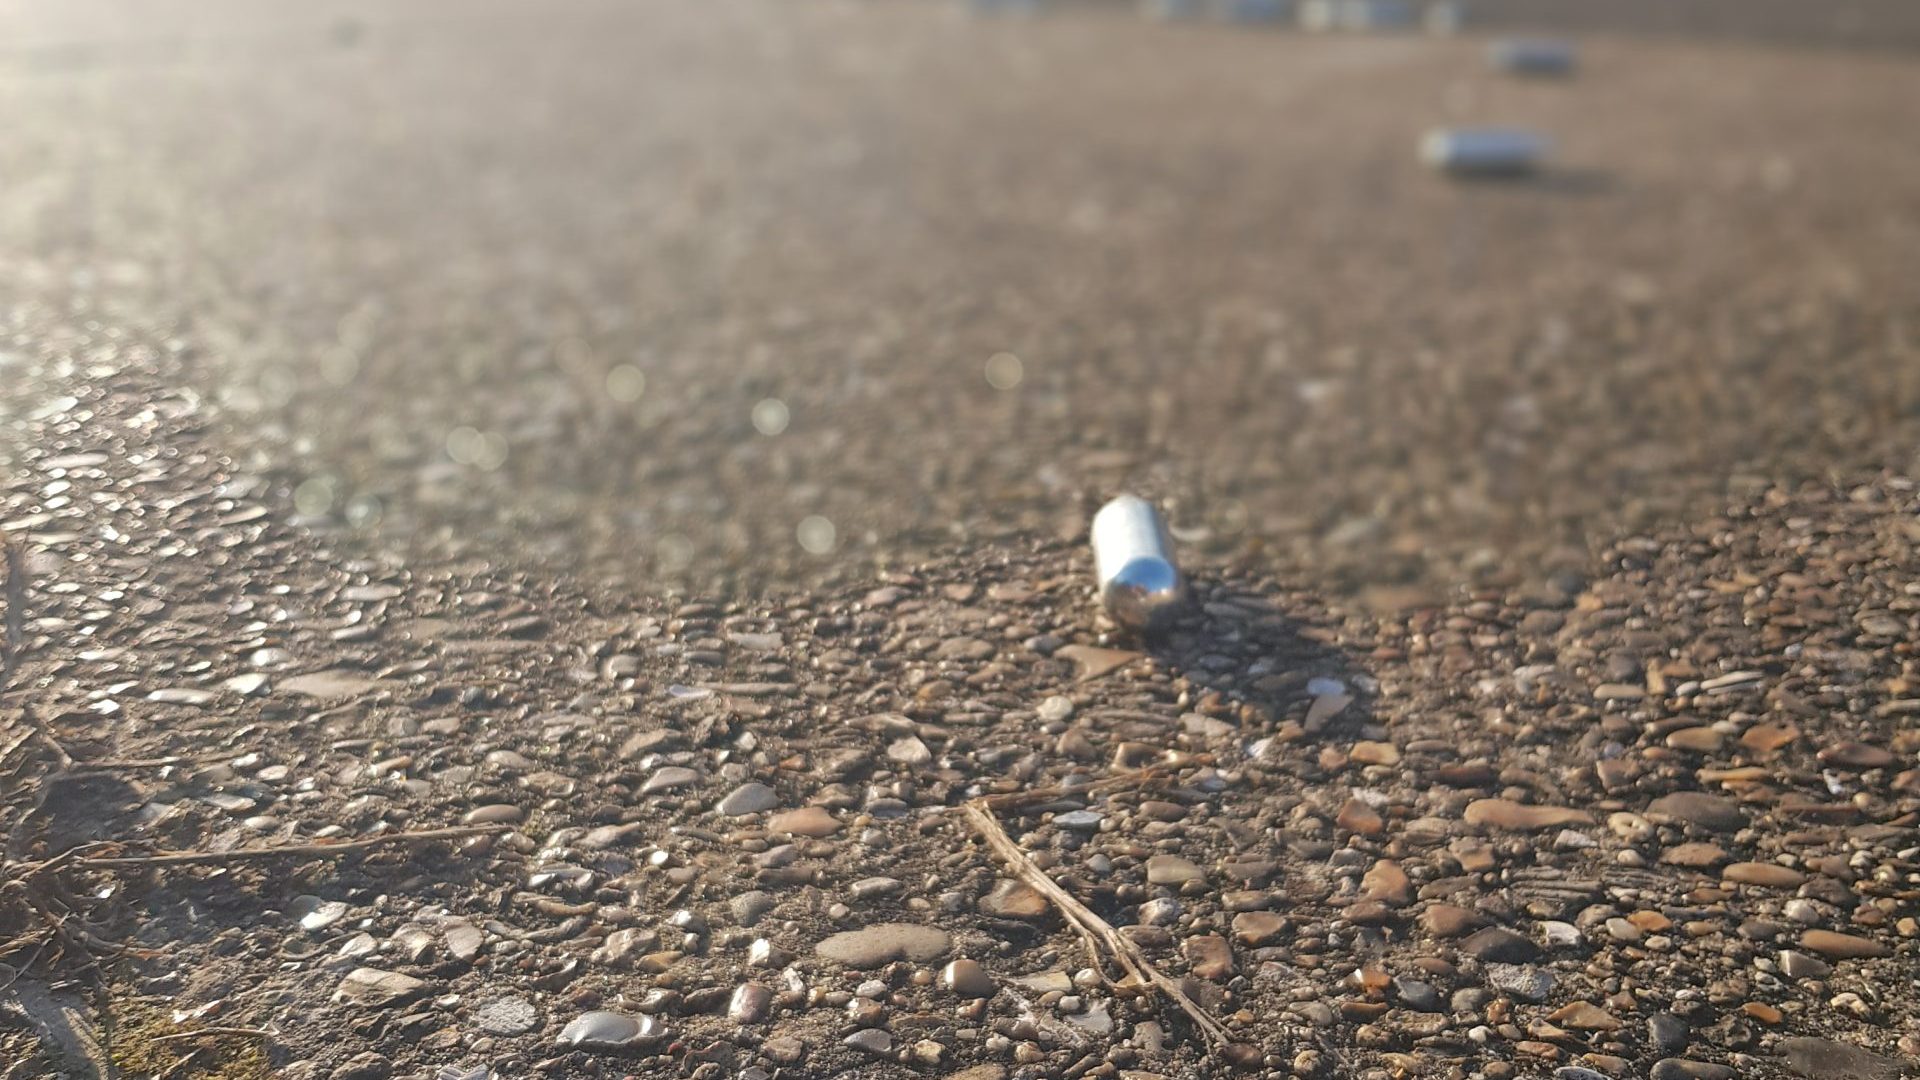 Used laughing gas canisters on the ground